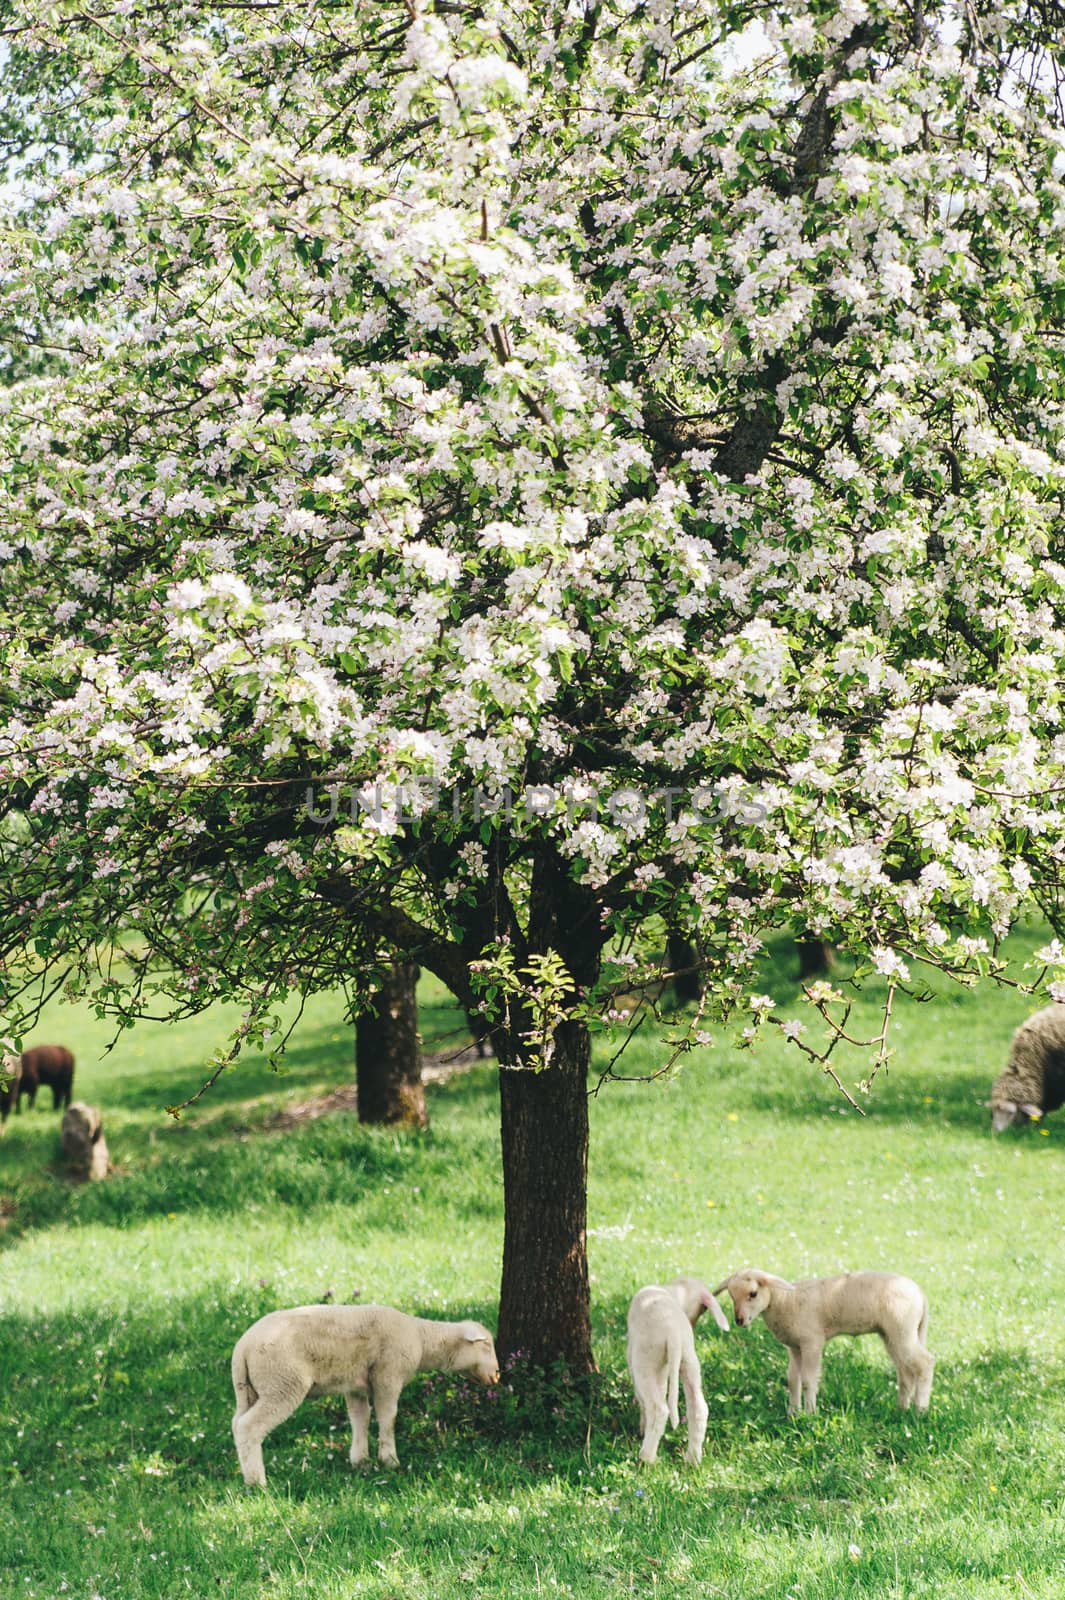 Flock of young Sheep under a Tree in SPringtime